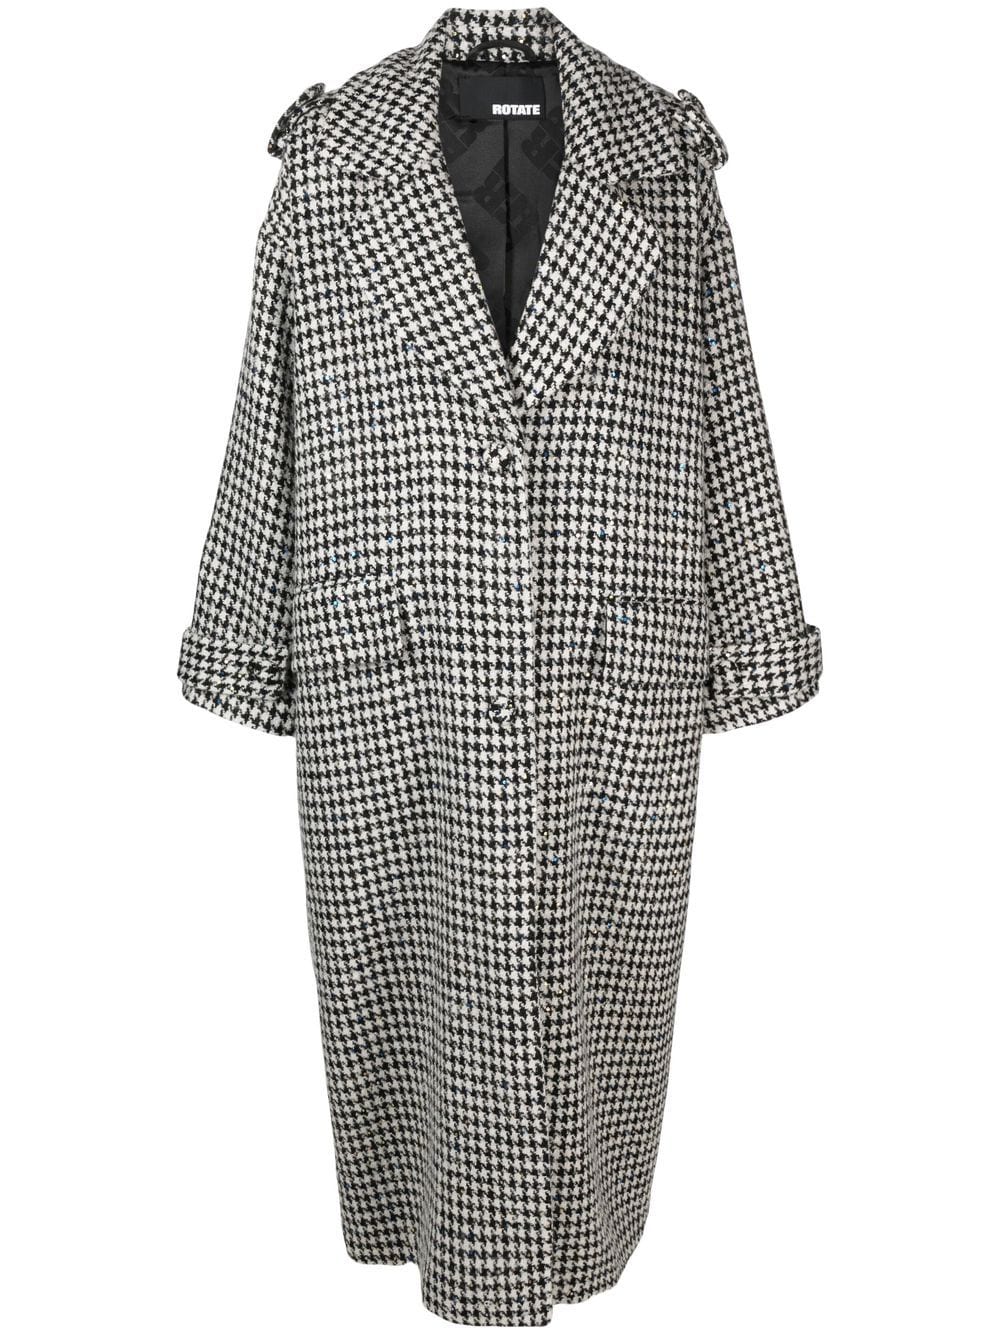 ROTATE sparkly houndstooth coat - Black